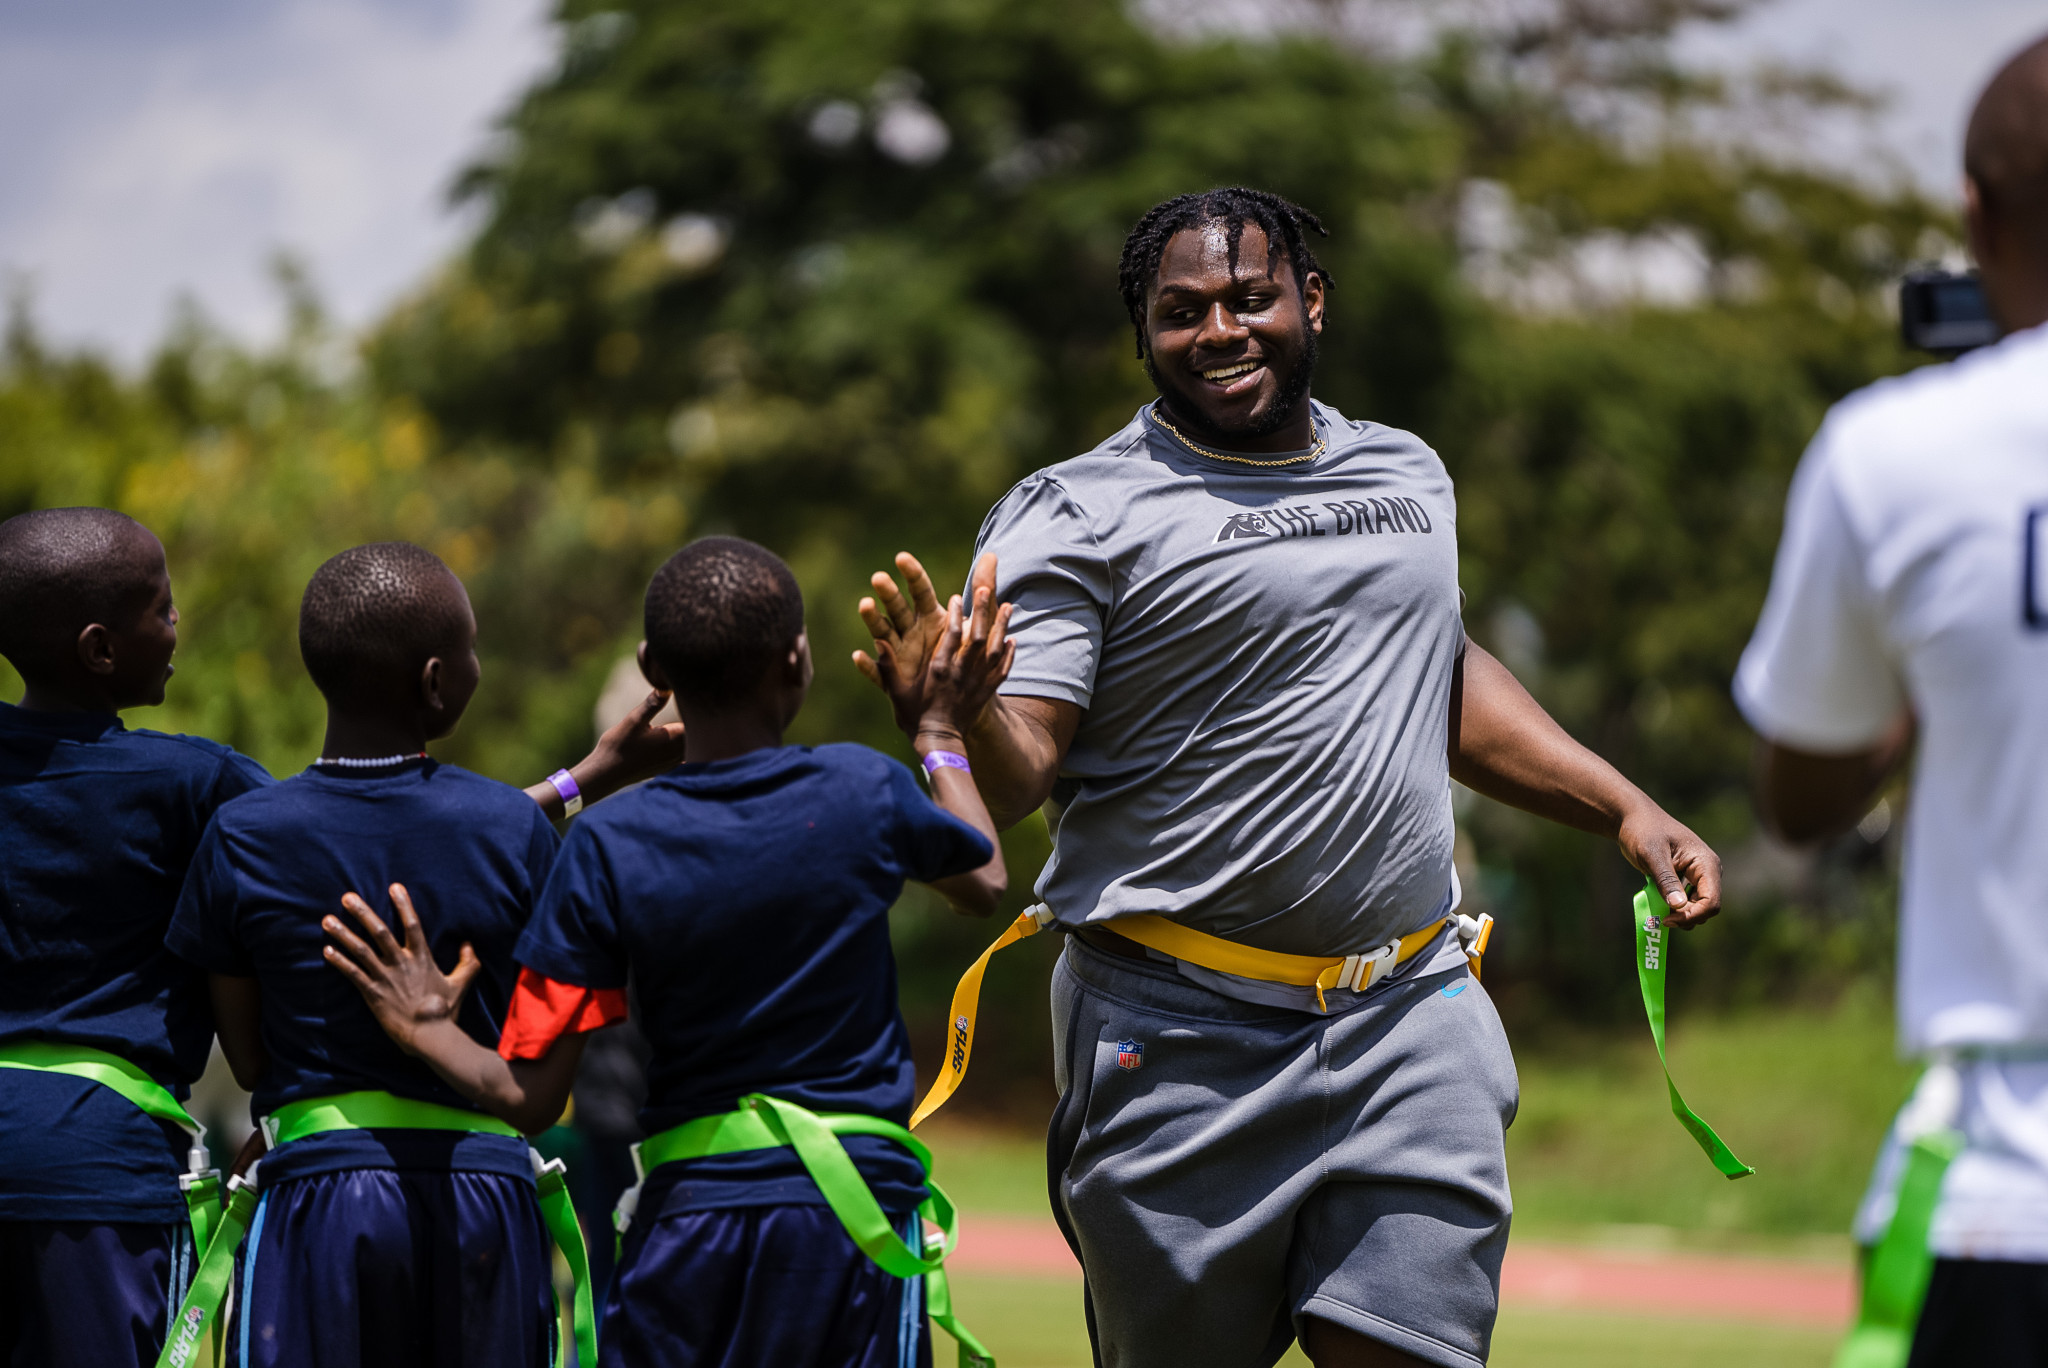 Ikem Ekwonu was one of several African NFL players that took part in the events in Kenya ©NFL